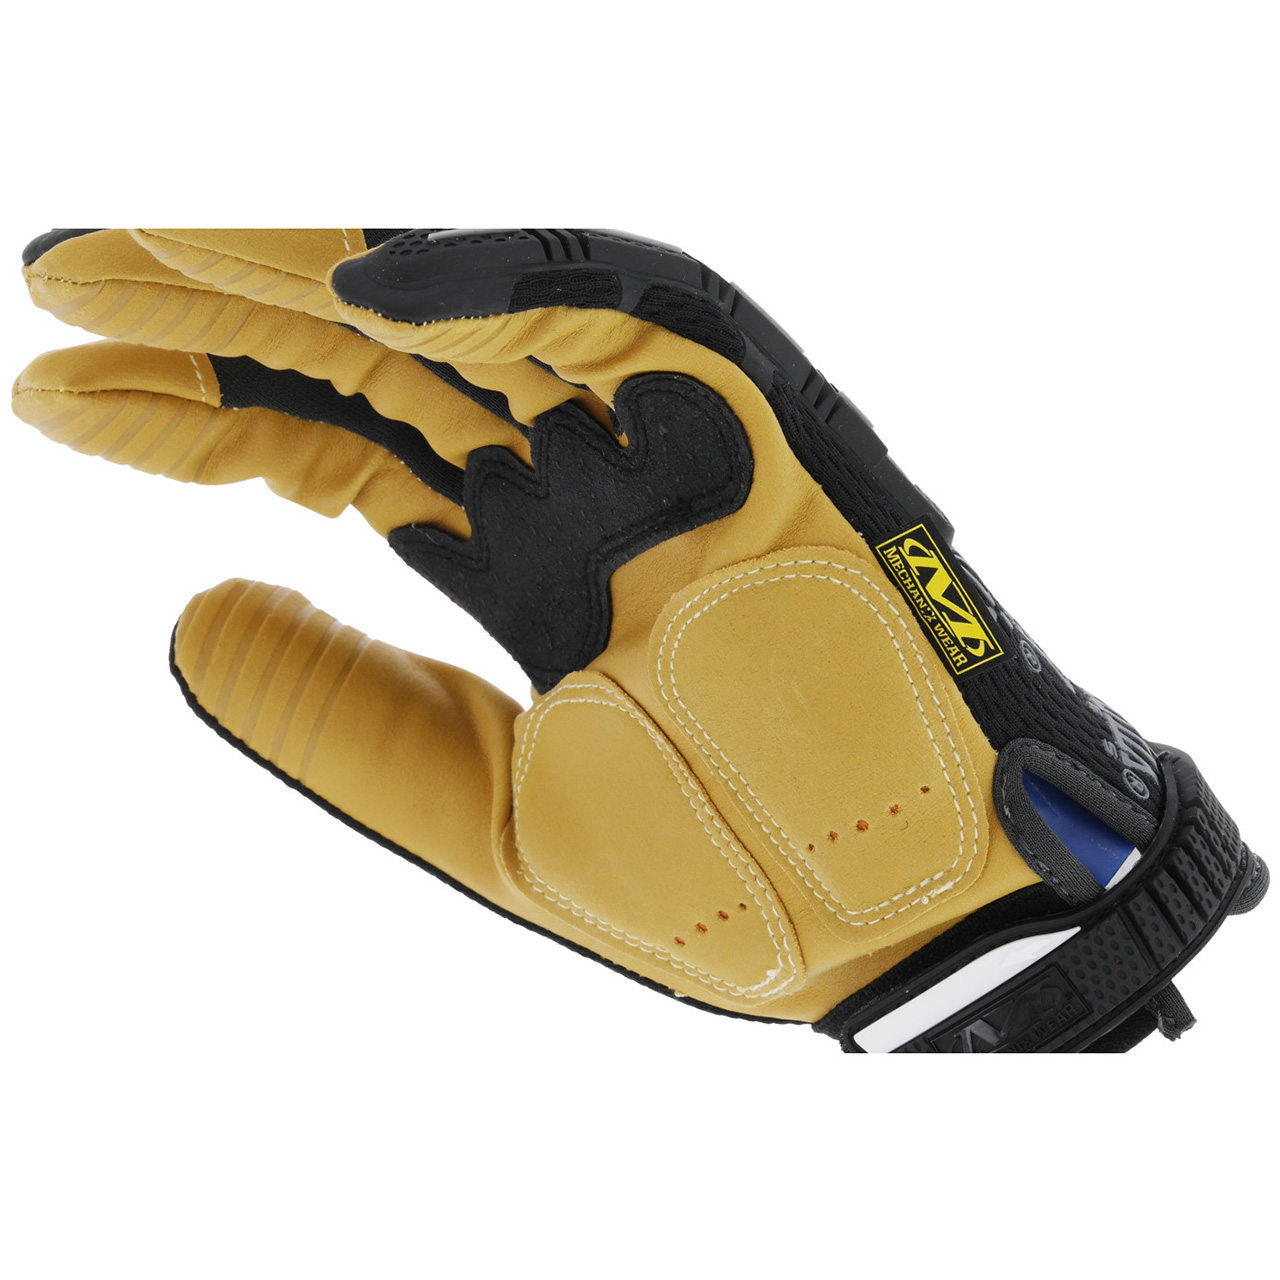 Mechanix Wear Original With Material 4X Palm And Fingertips